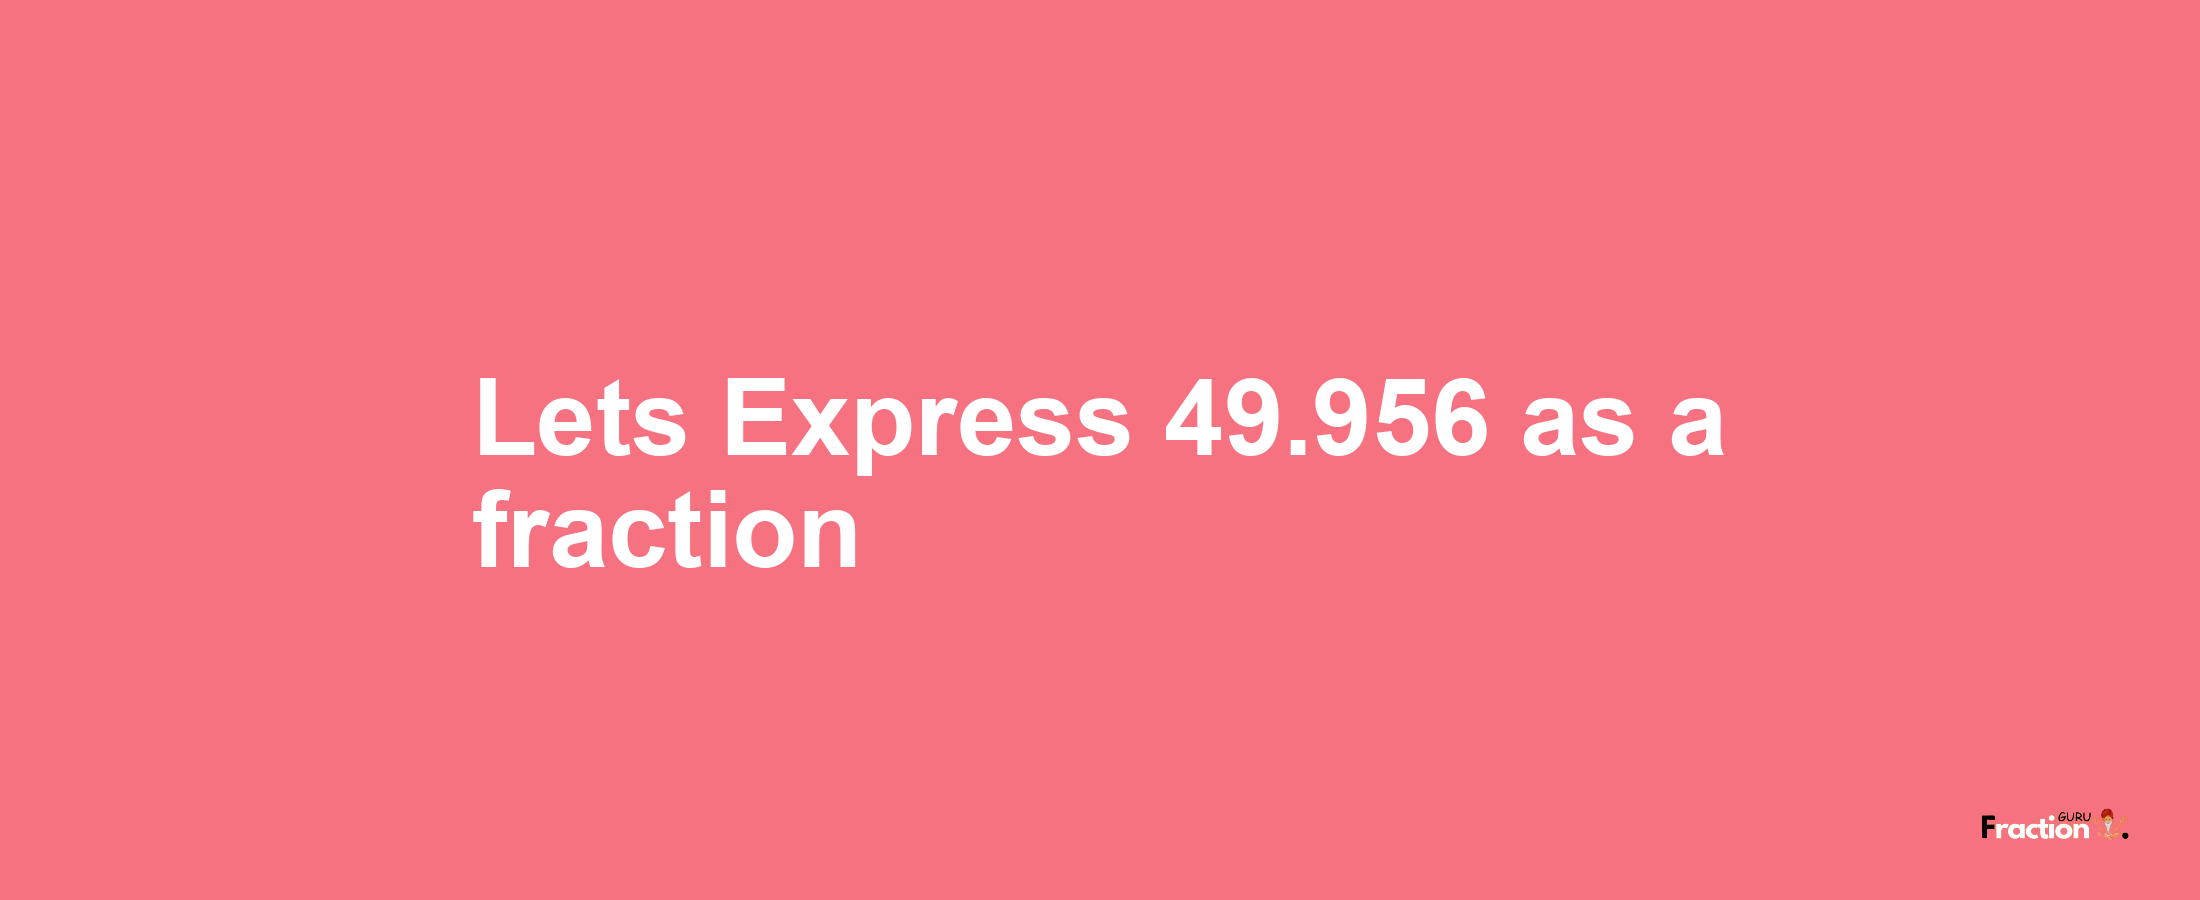 Lets Express 49.956 as afraction